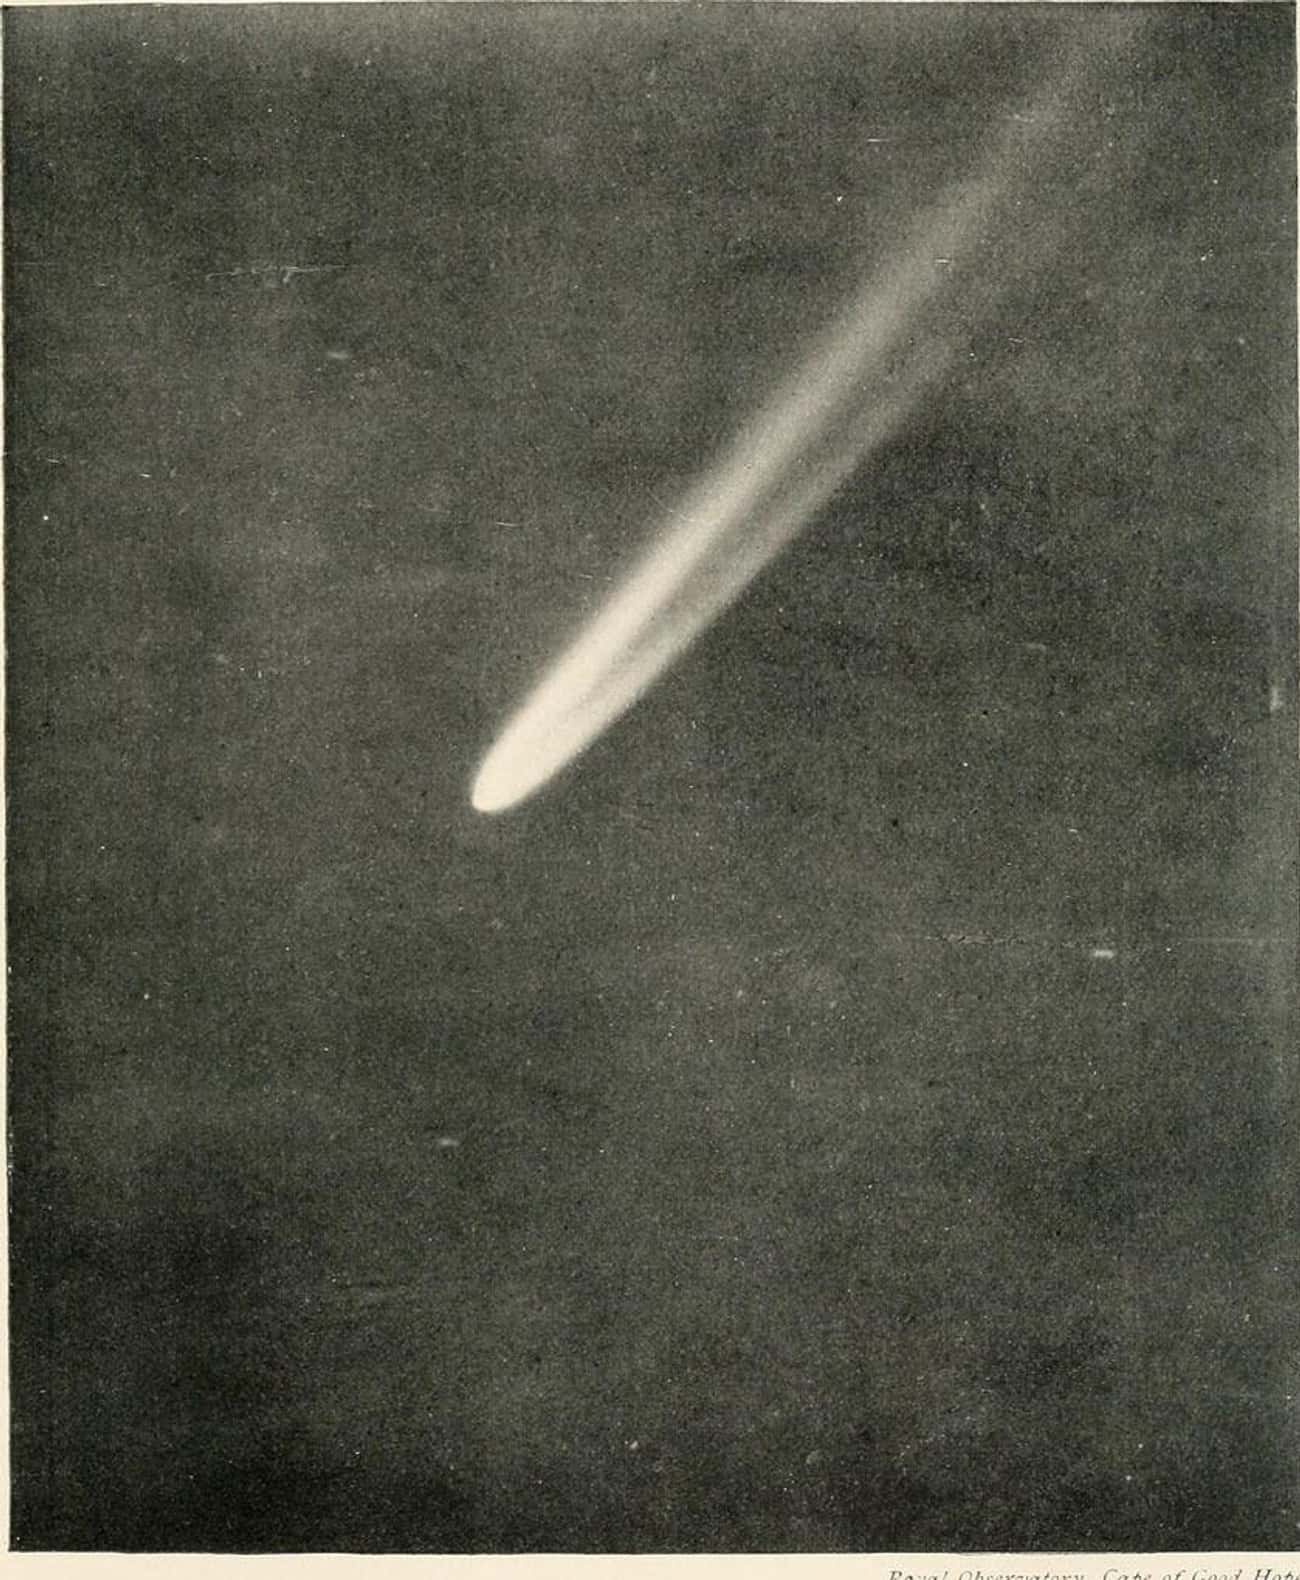 People Thought The Comet Would Fill Our Atmosphere With Deadly Cyanogen In 1910